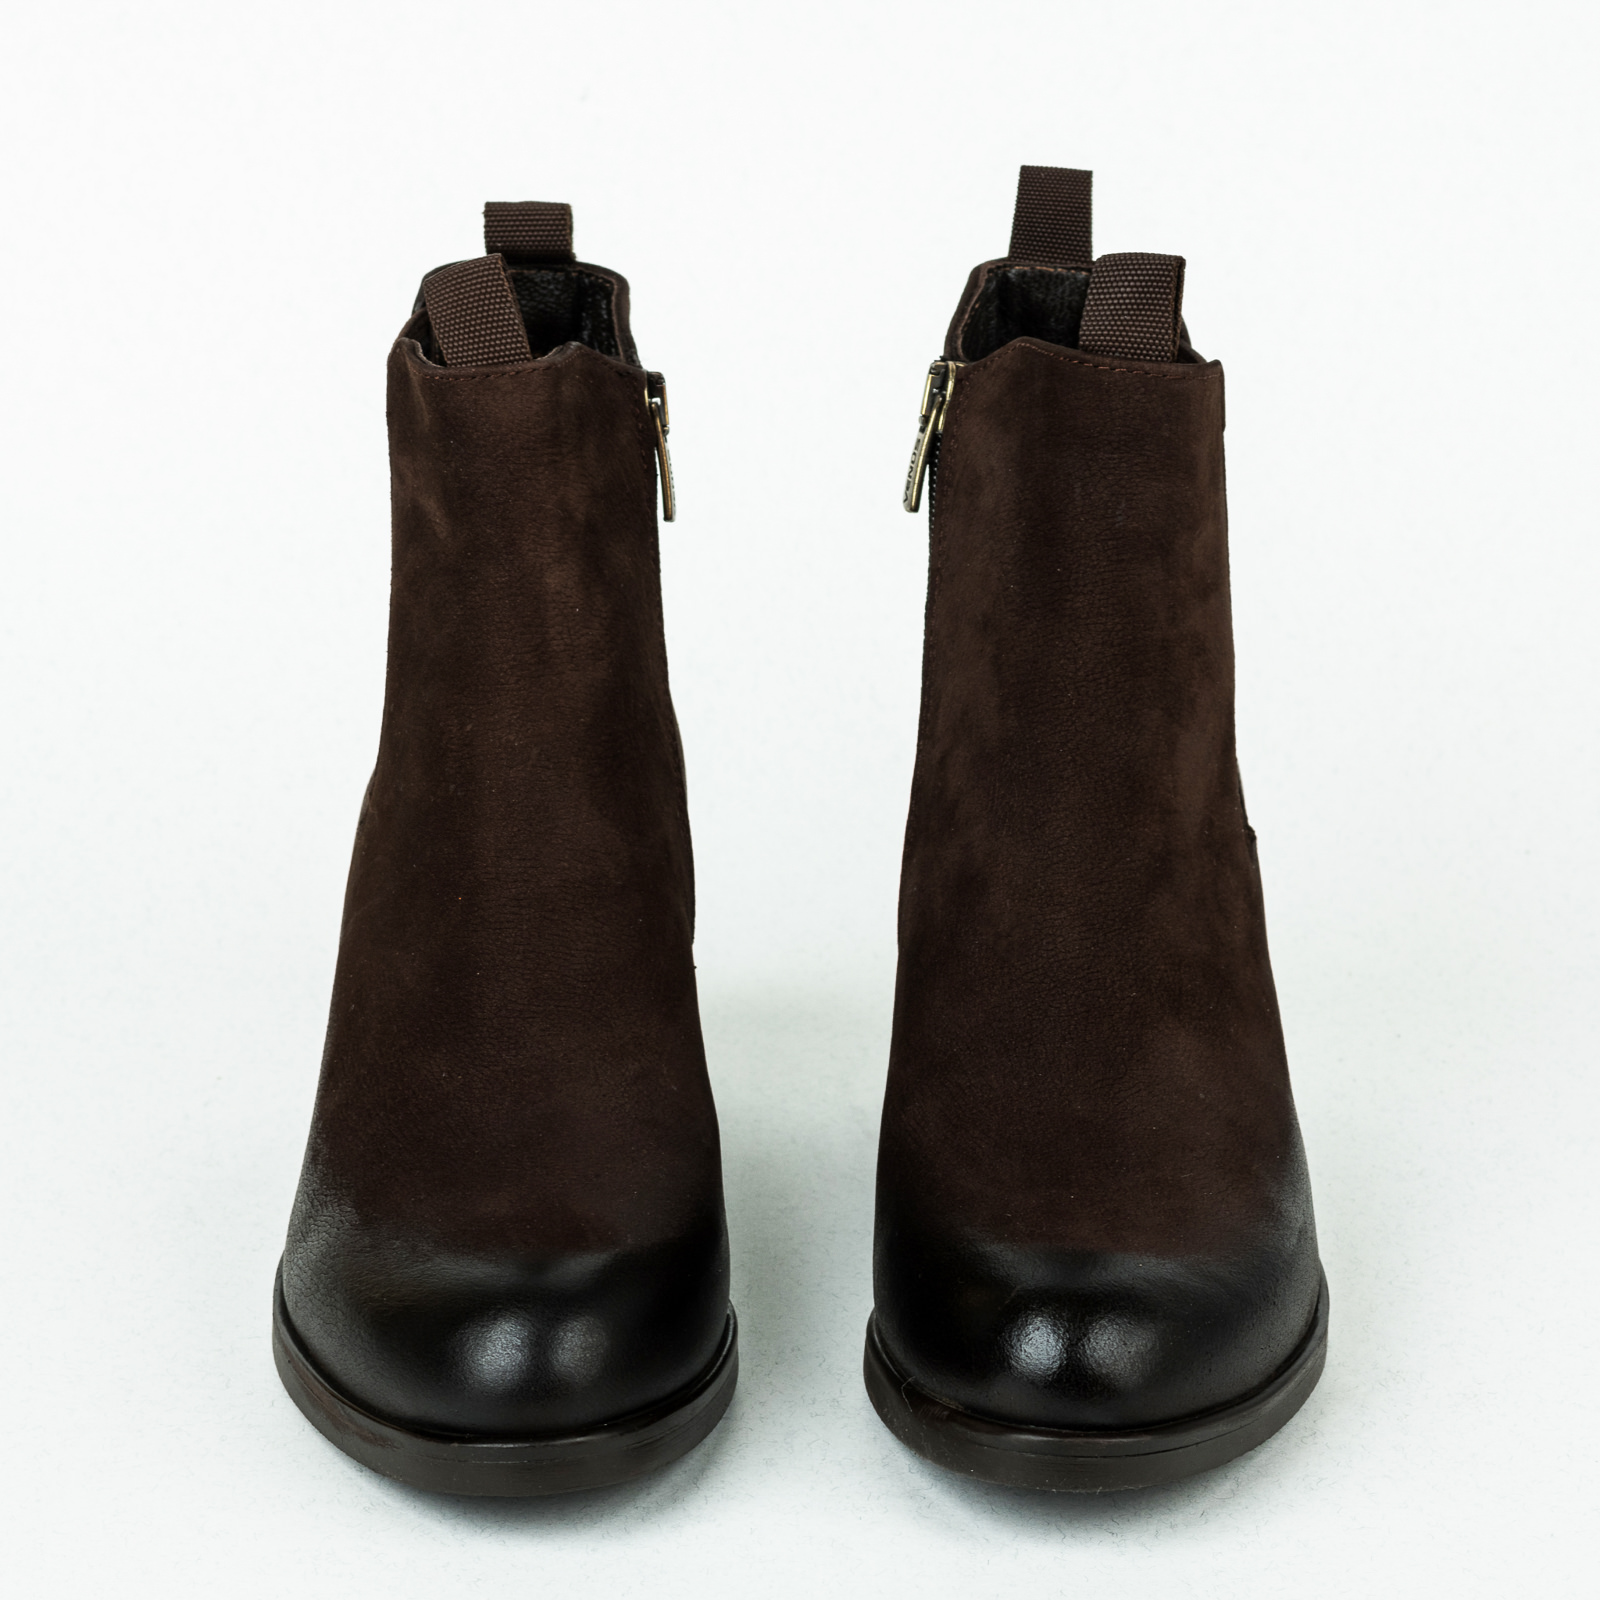 Leather ankle boots B067 - BROWN